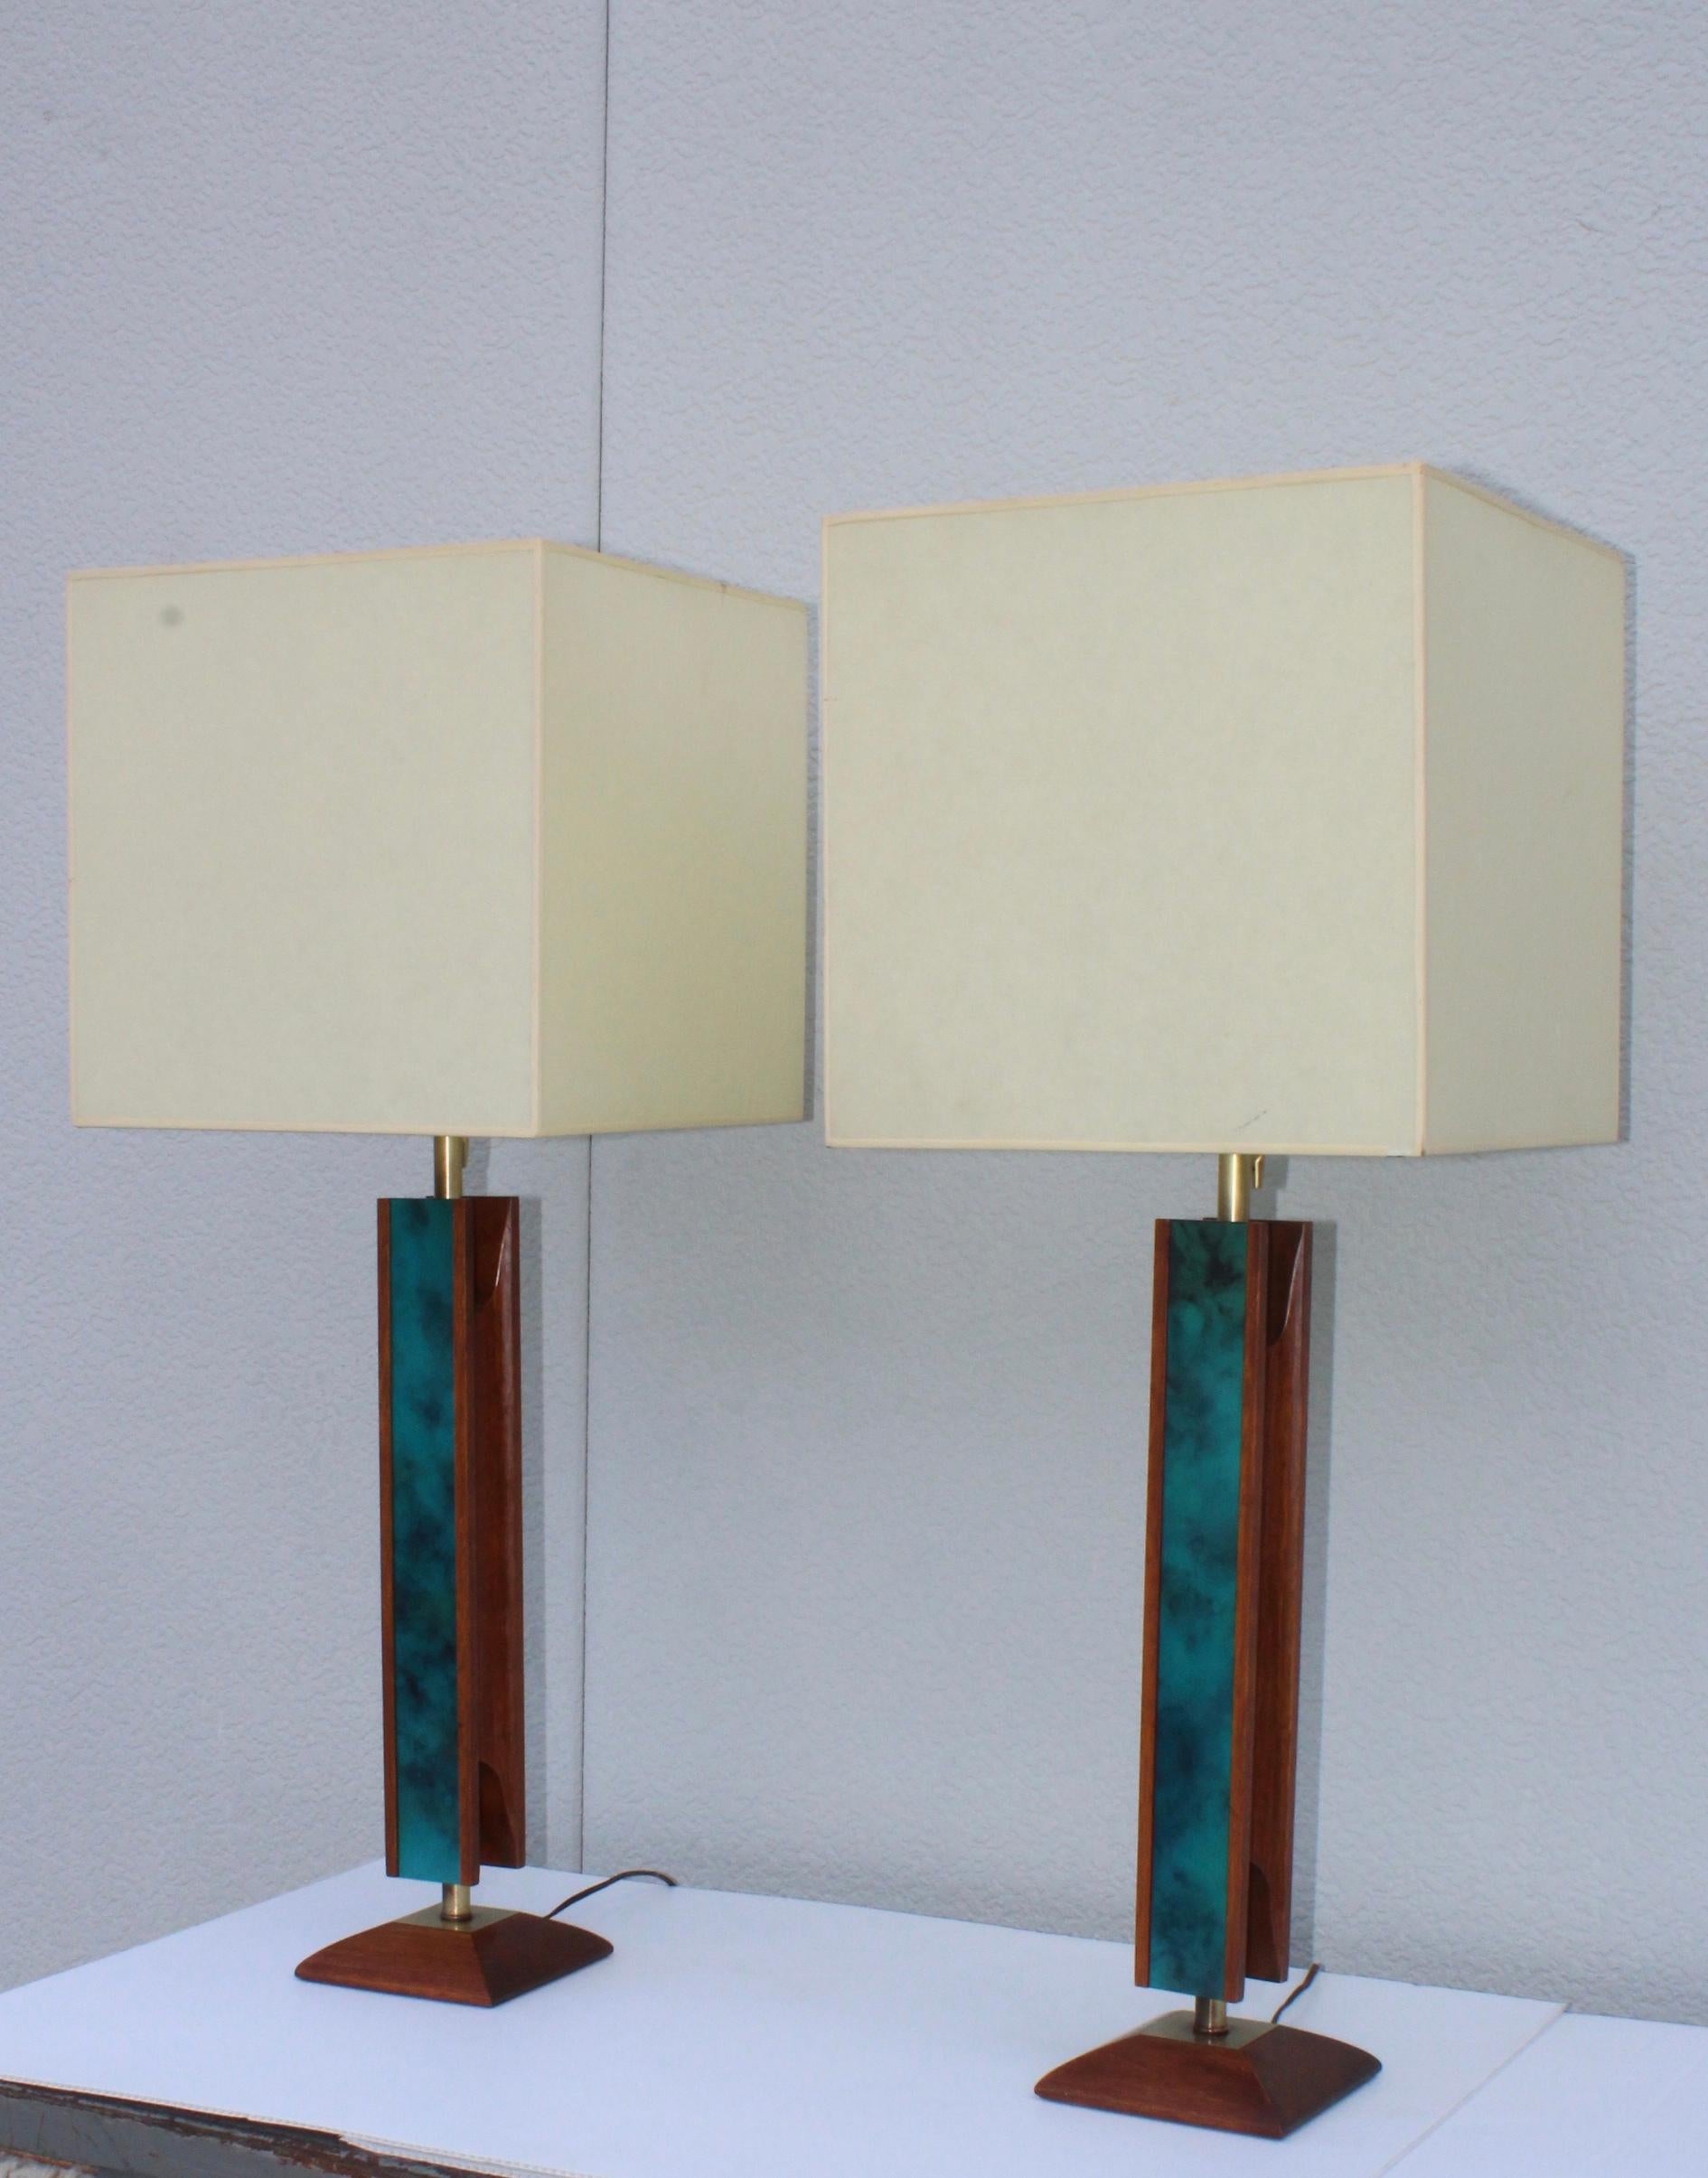 1960s Mid-Century Modern walnut and brass table lamps by Modeline. With enamel detail.

Measures: Height to light socket 27''.

Shades for photography only.